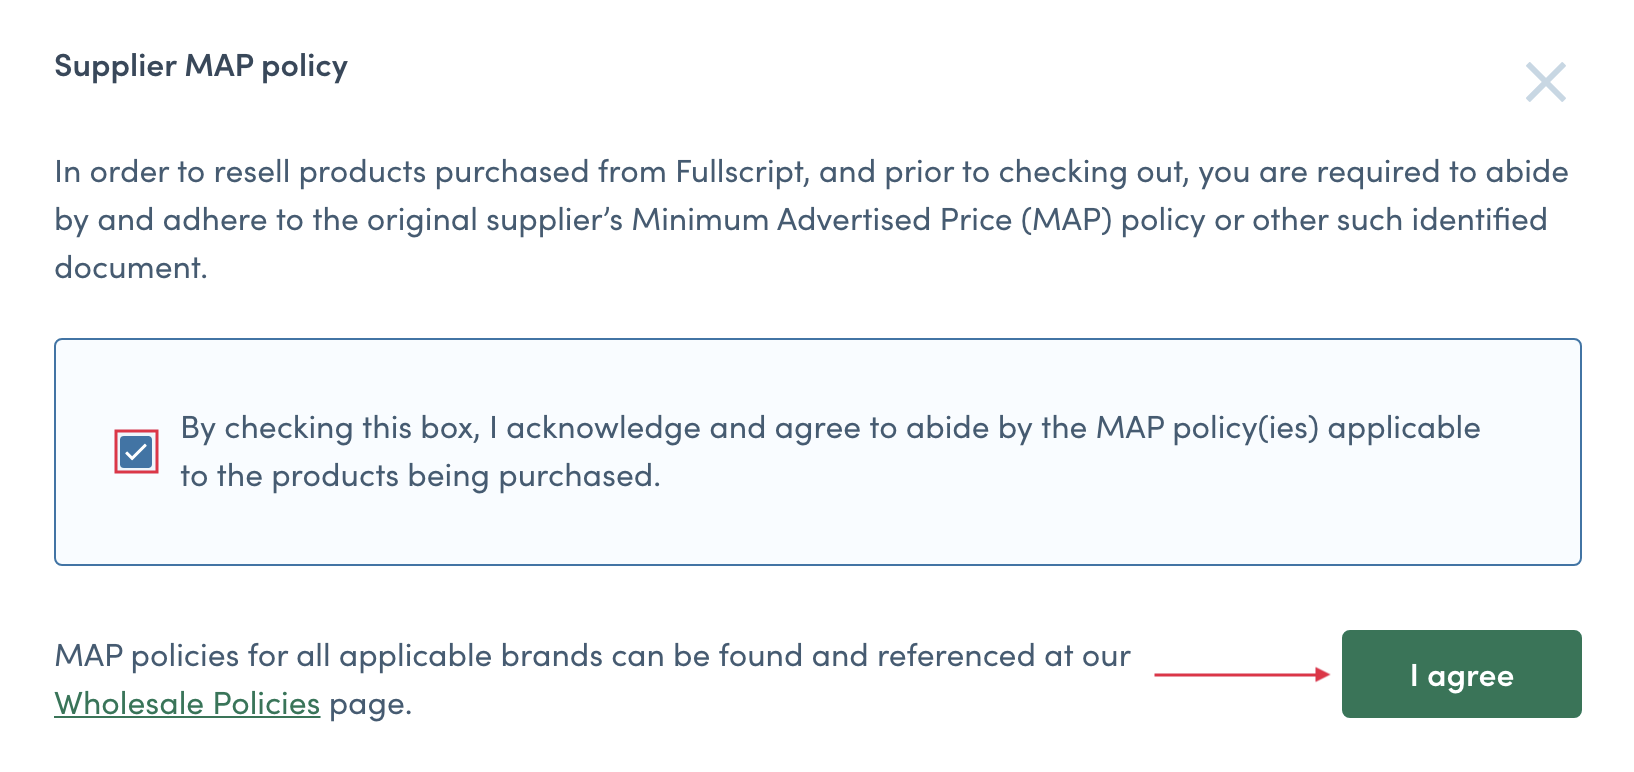 agreeing to wholesale minimum advertised price policies from the wholesale policies page